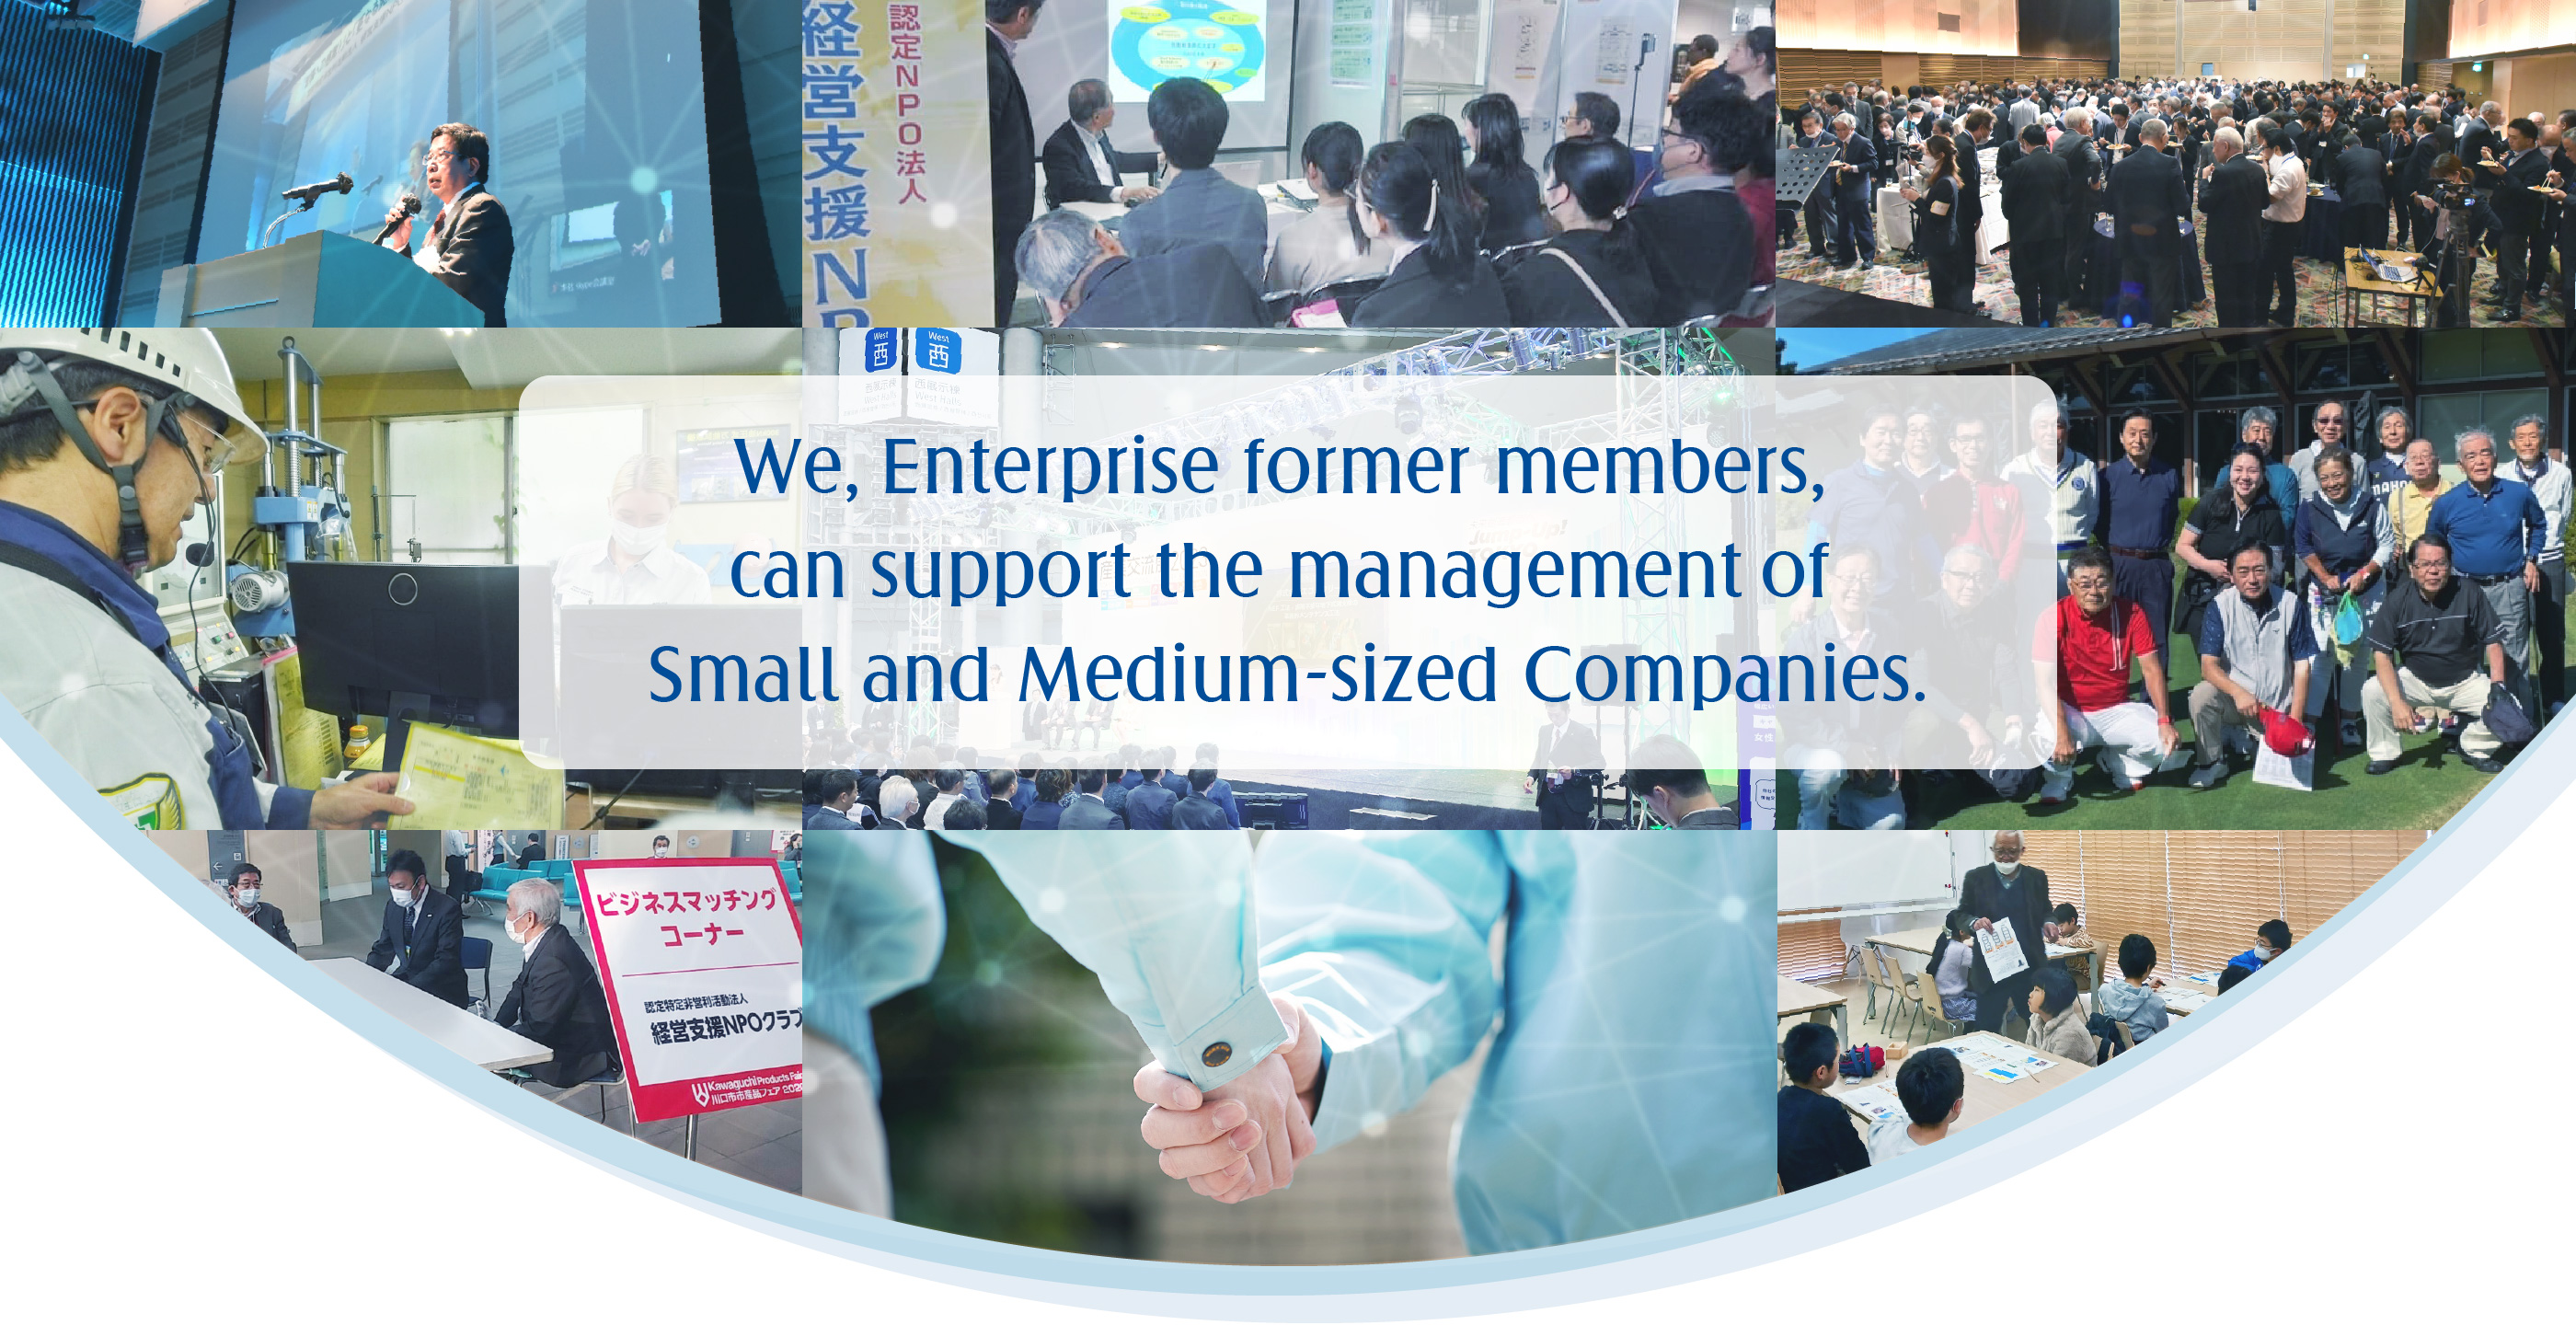 We, Enterprise former members, can support the management of Small and Medium-sized Companies.